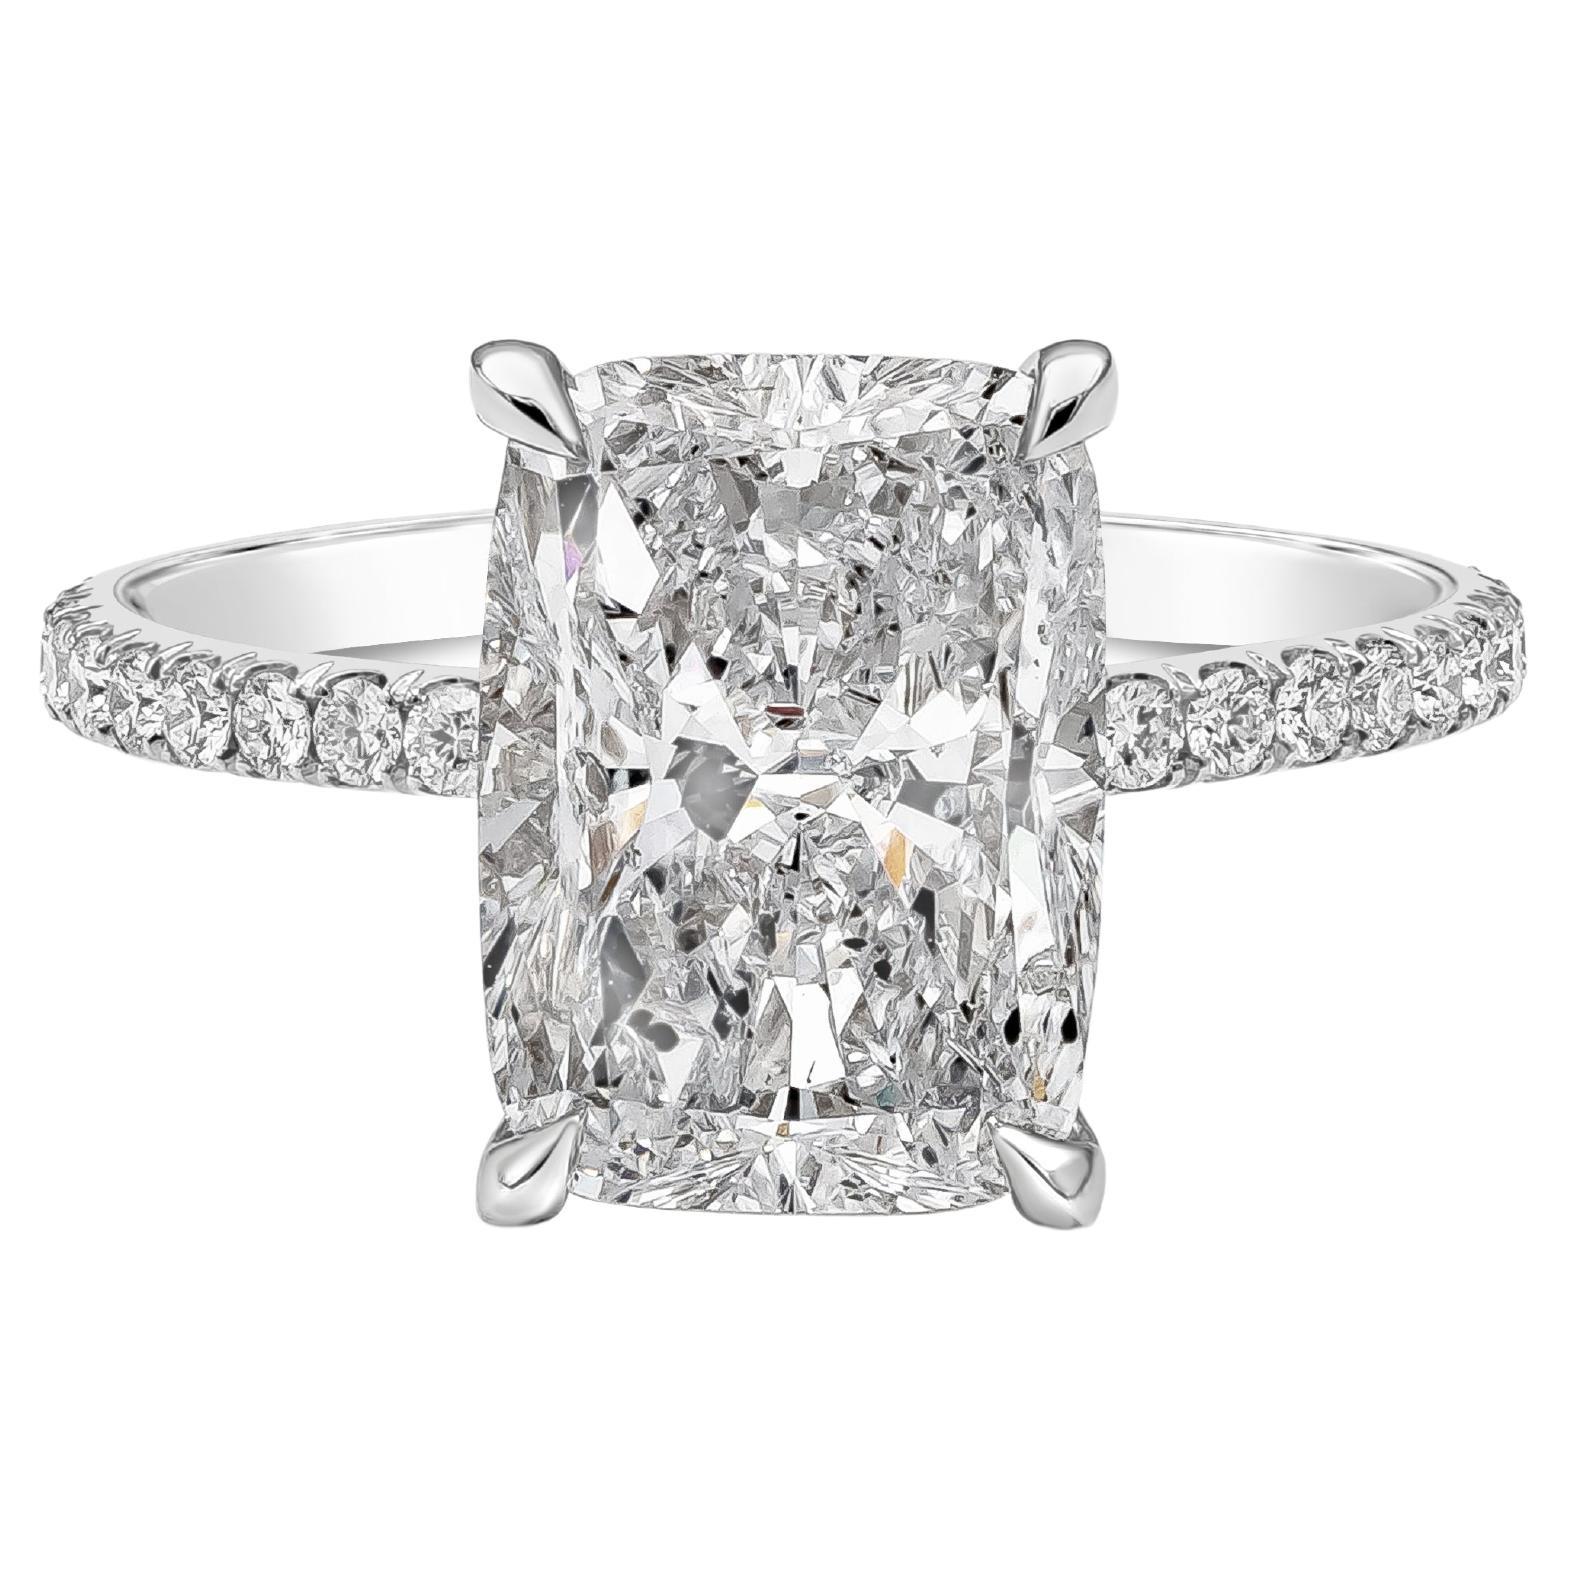 GIA Certified 4.02 Carat Elongated Cushion Cut Diamond Engagement Ring For Sale